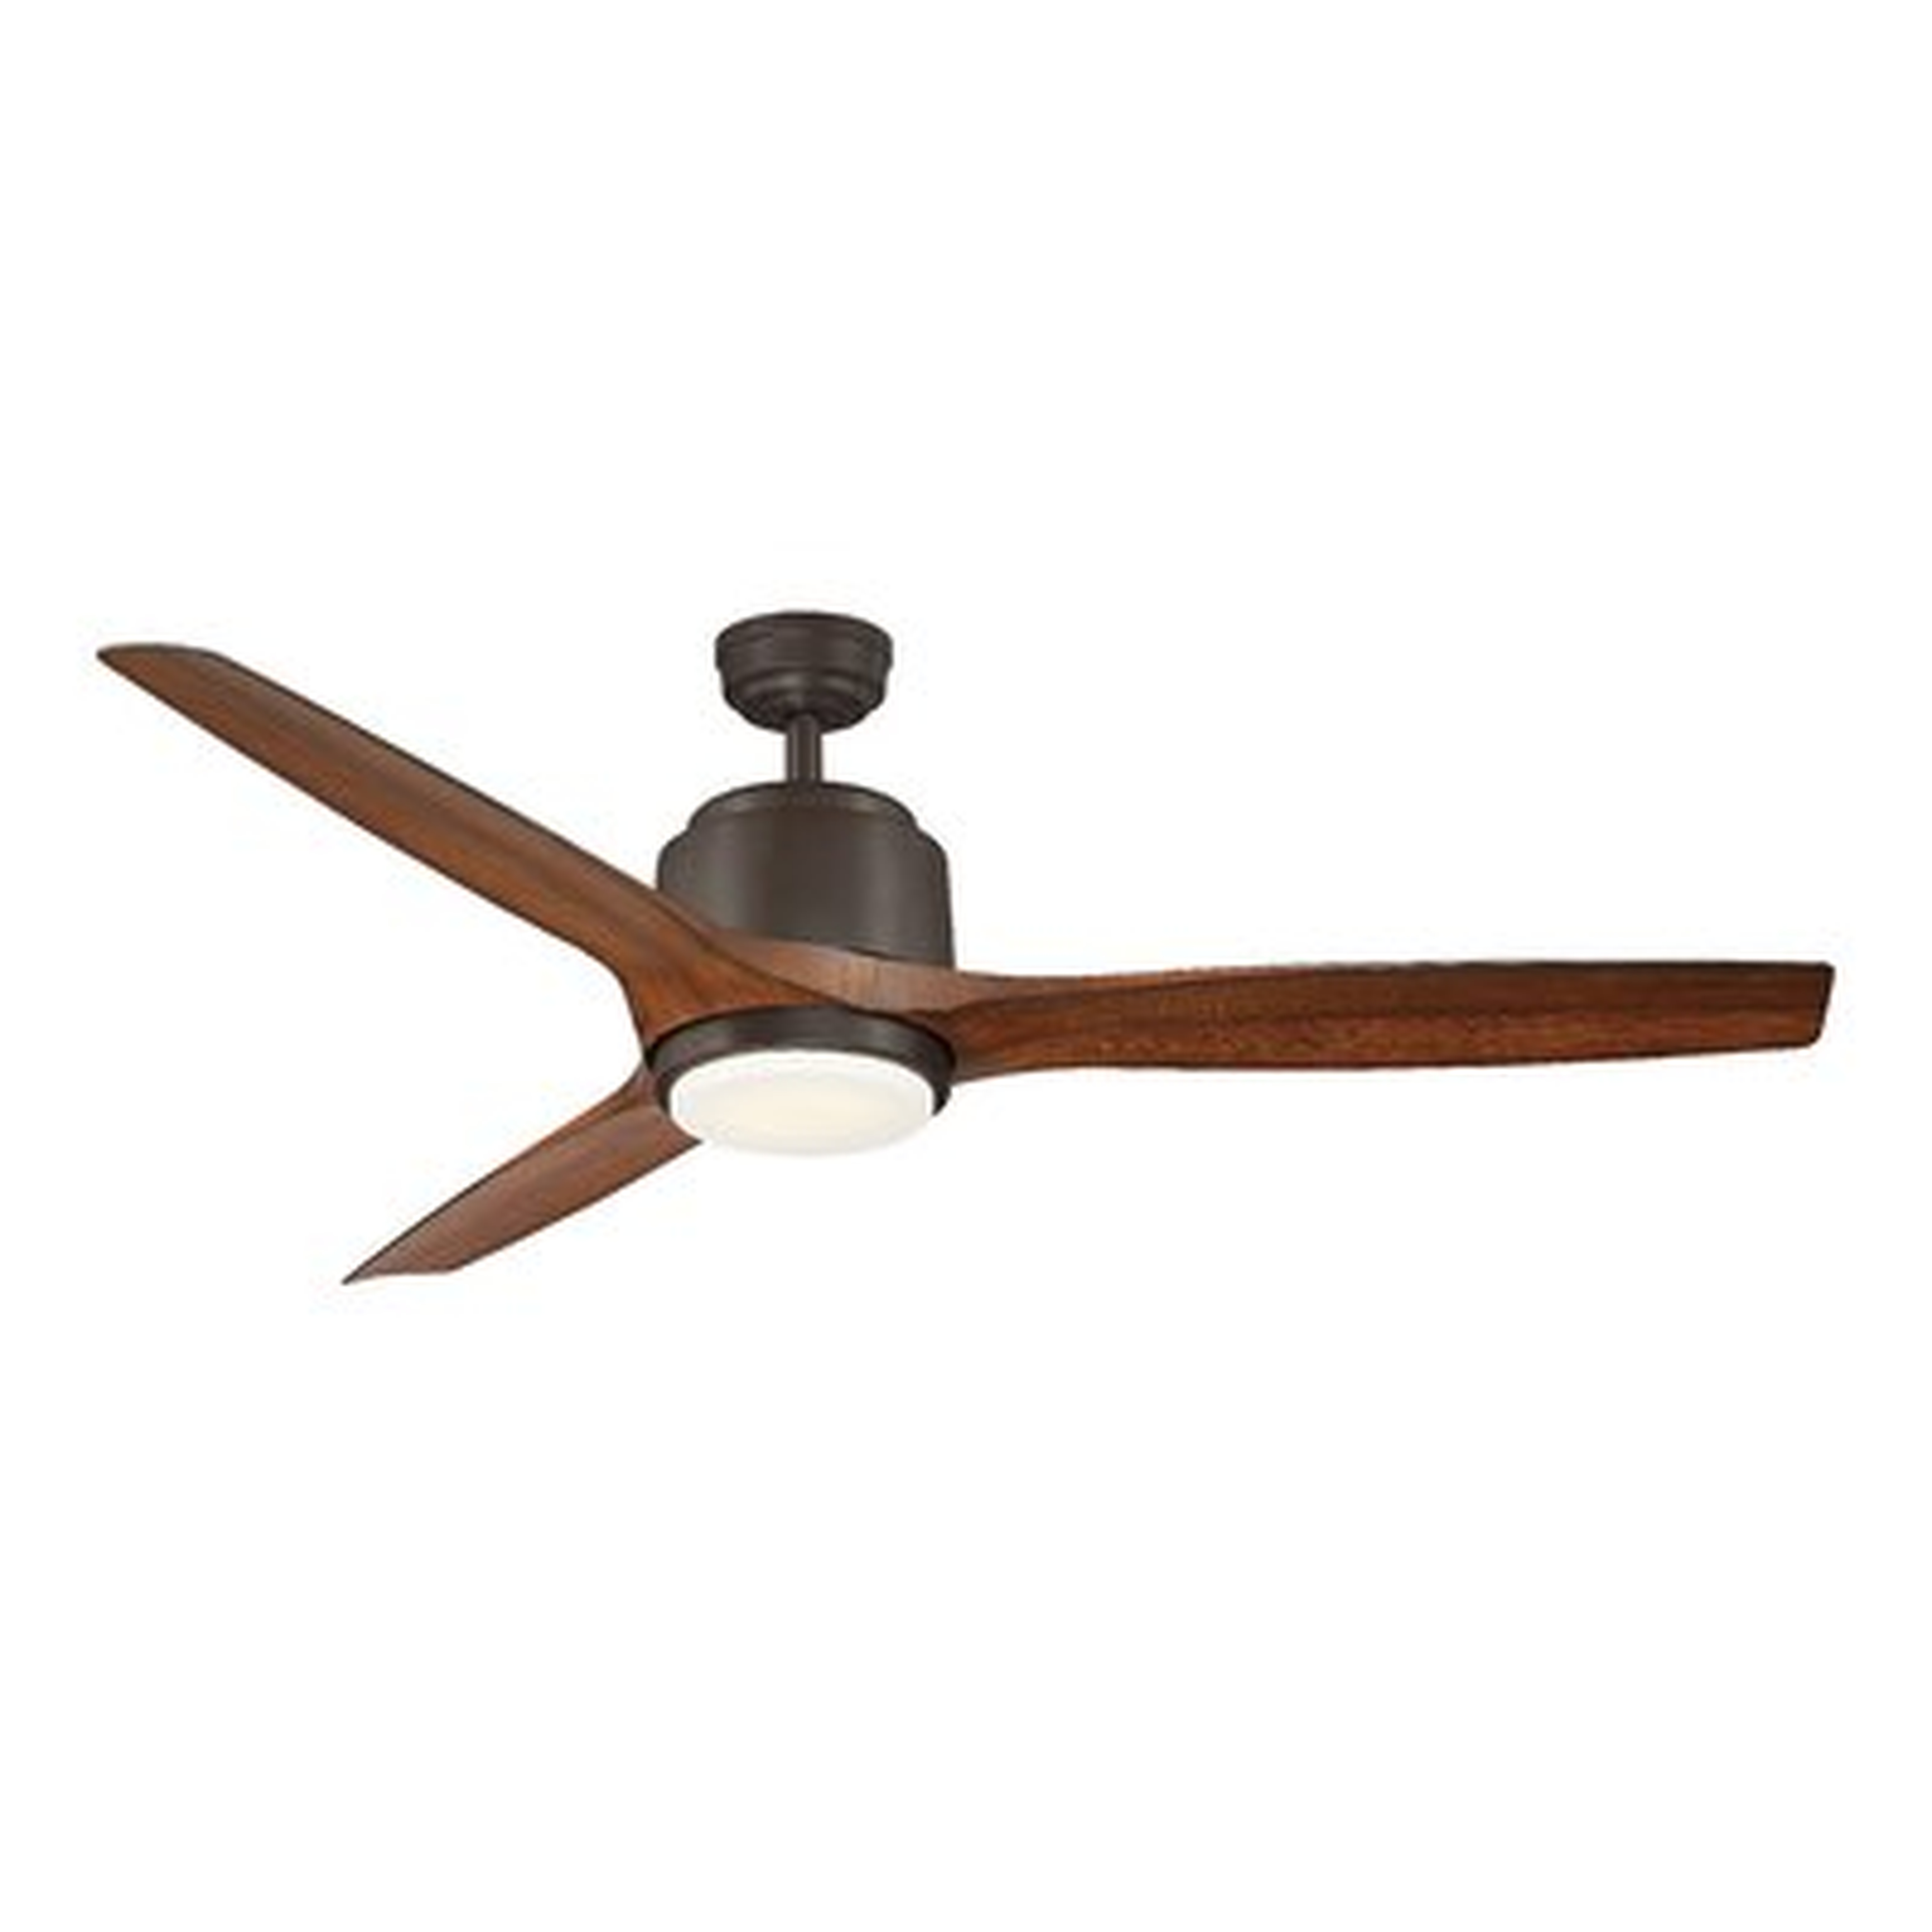 56" Whiling 3 - Blade Outdoor LED Standard Ceiling Fan with Remote Control and Light Kit Included - Birch Lane